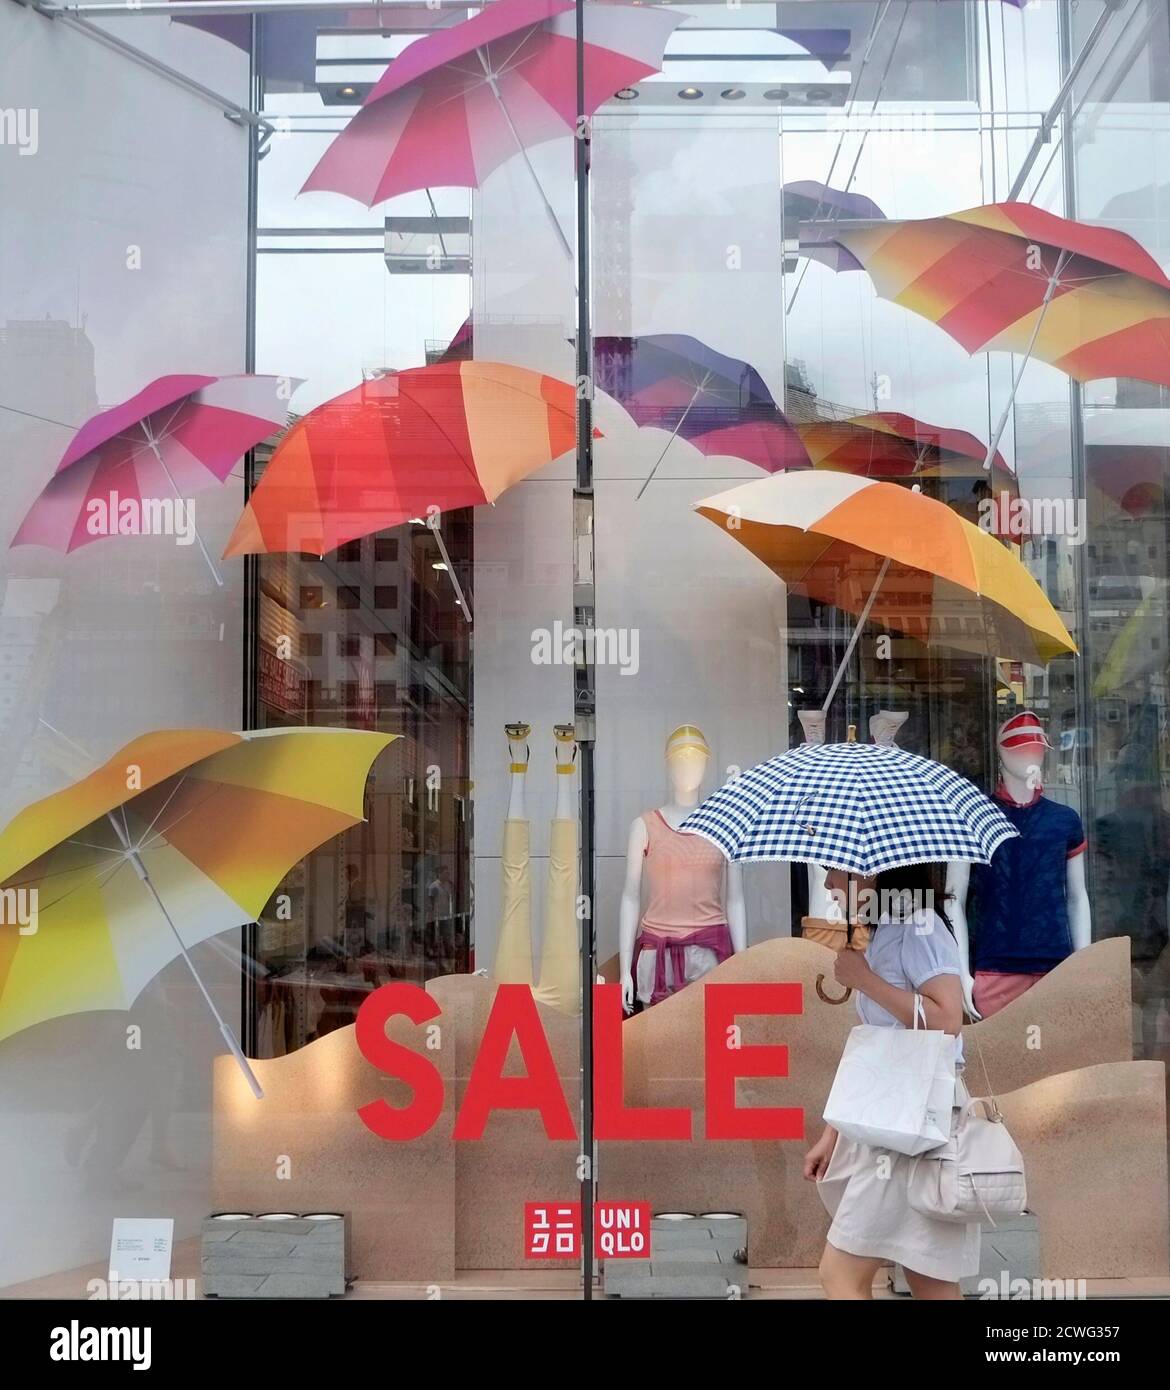 A woman walks past a Fast Retailing's Uniqlo casual clothing store in Tokyo July 10, 2014. Japan's Fast Retailing Co , operator of the Uniqlo casualwear brand, on Thursday posted a 9.9 percent rise in operating profit in the nine months through May, as its overseas Uniqlo sales showed strong growth. REUTERS/Toru Hanai (JAPAN - Tags: BUSINESS FASHION) Stock Photo